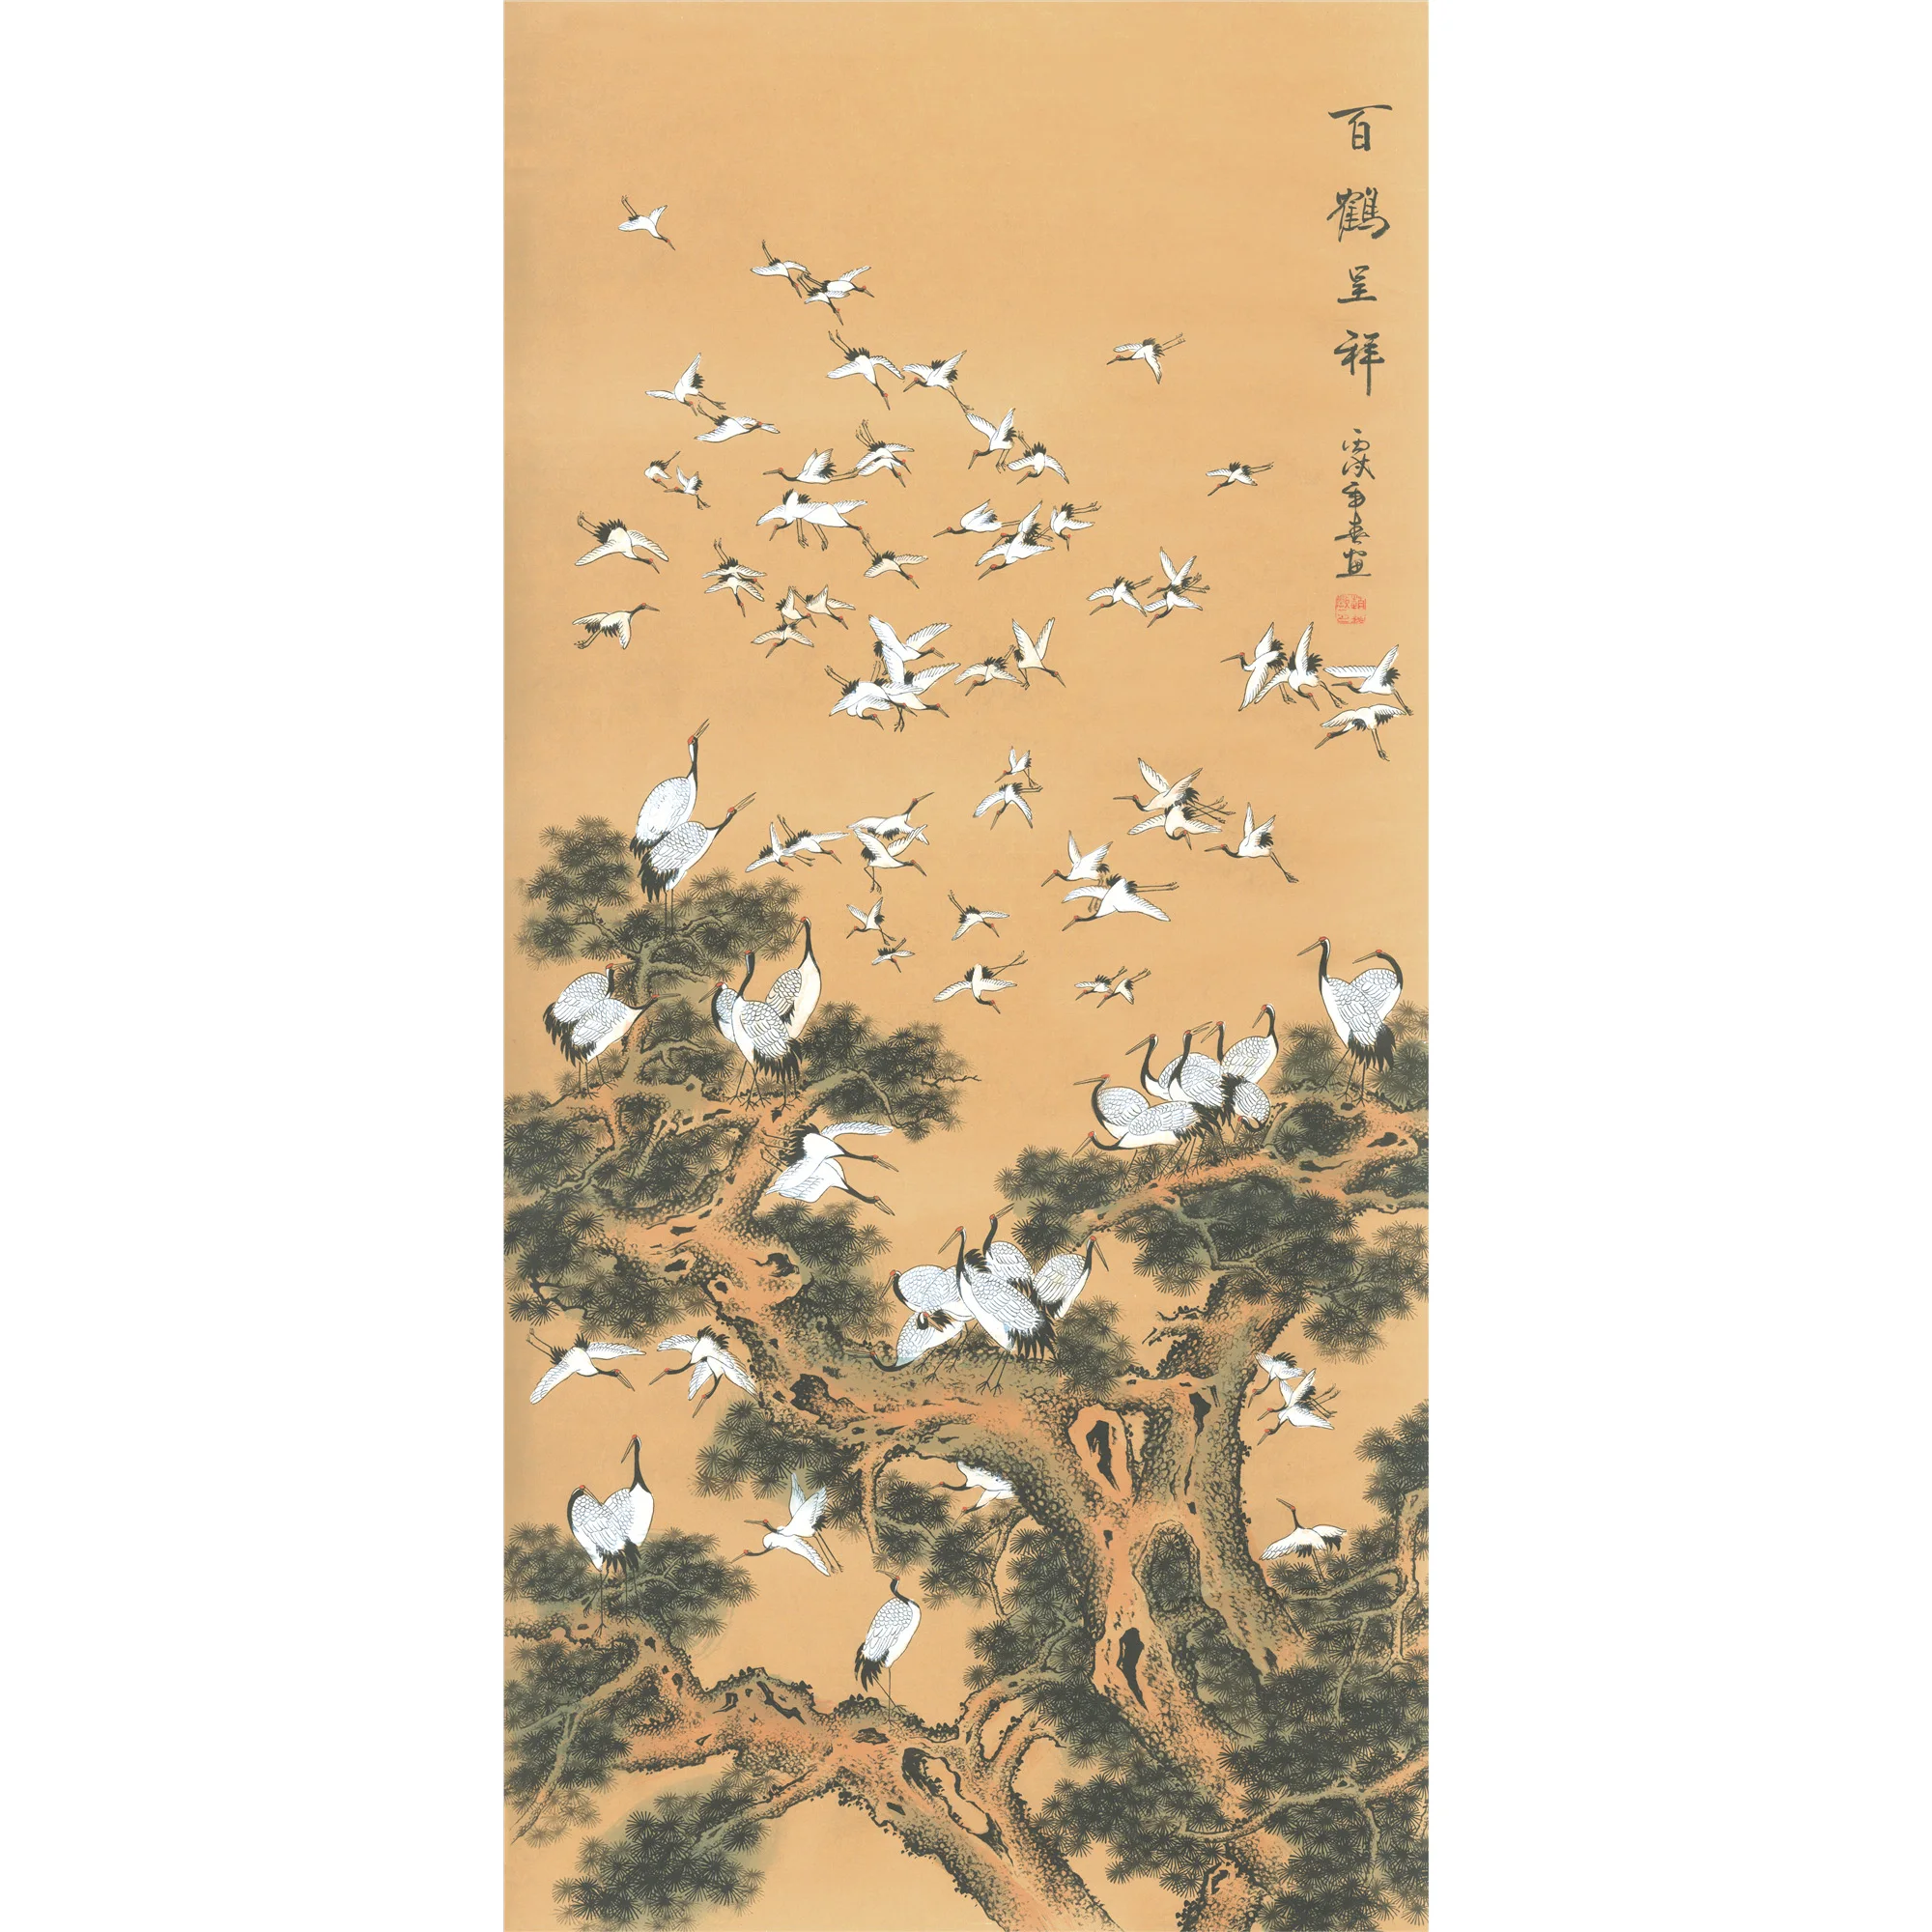 

Chinese Feng Shui Silk Hanging Painting,Home/Office Decoration Calligraphy Artwork Wall Scroll - Cranes